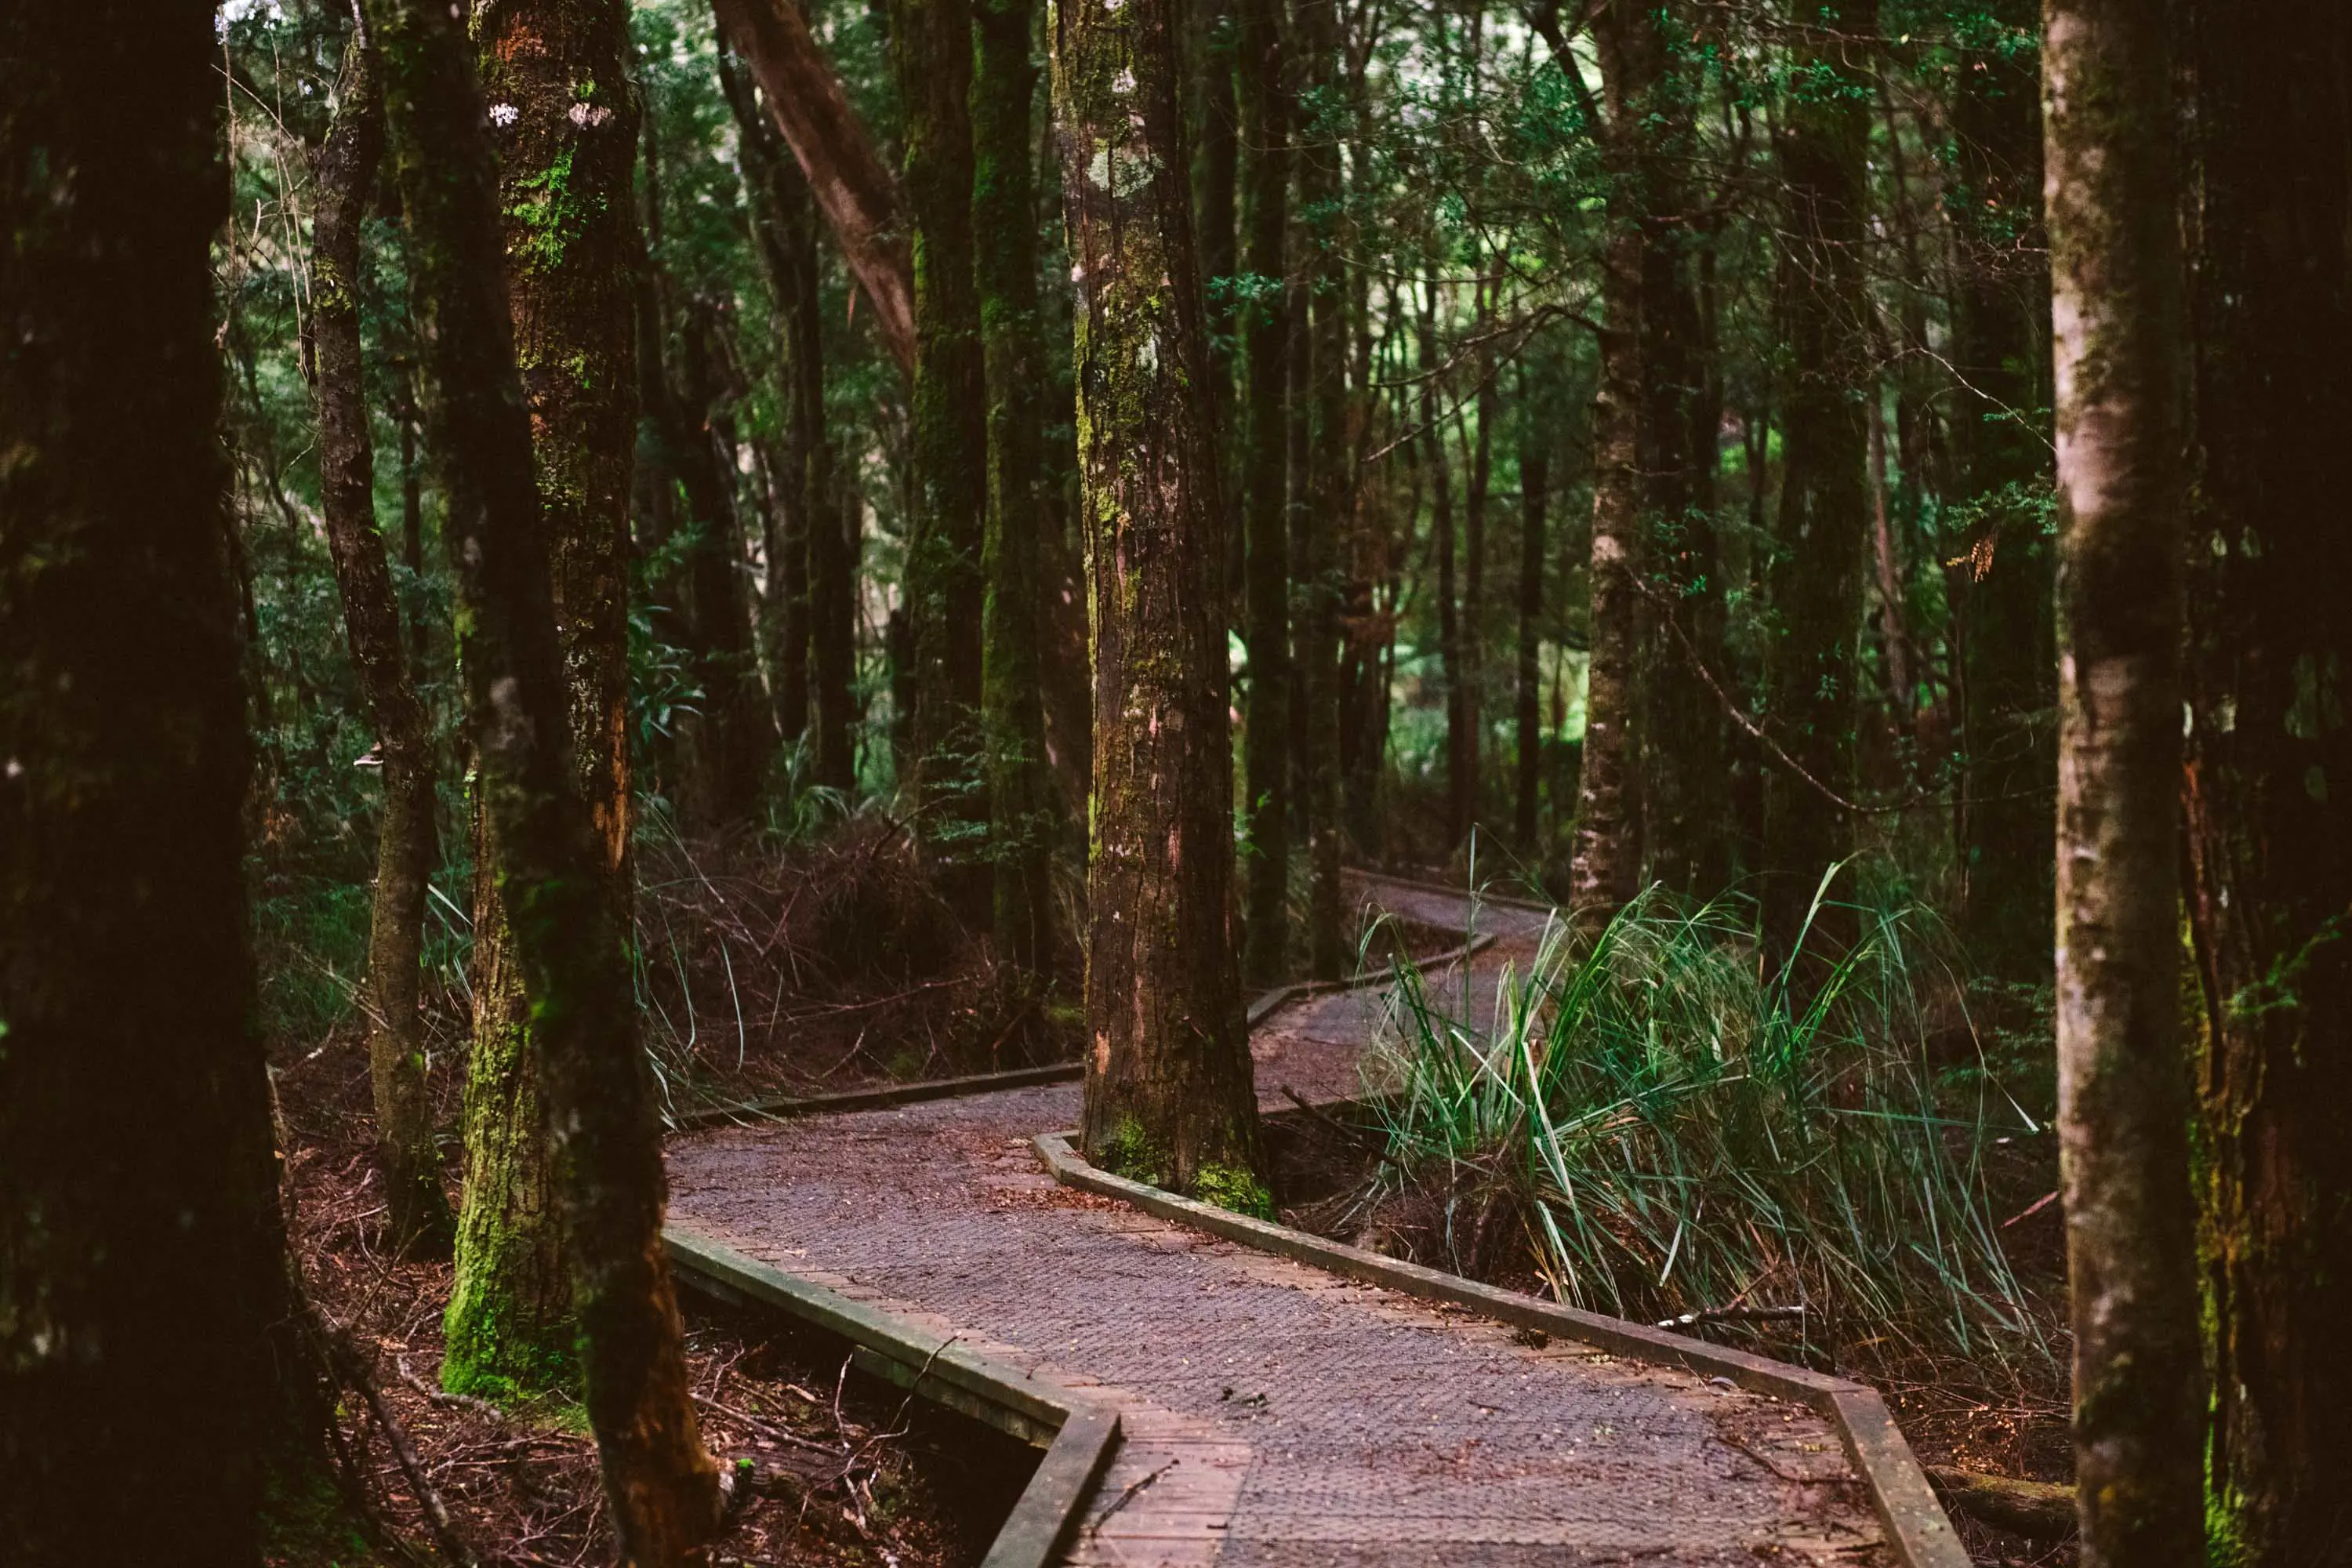 Vibrant image of a walkway surrounded by lush greenery on the Huon Pine Walk.